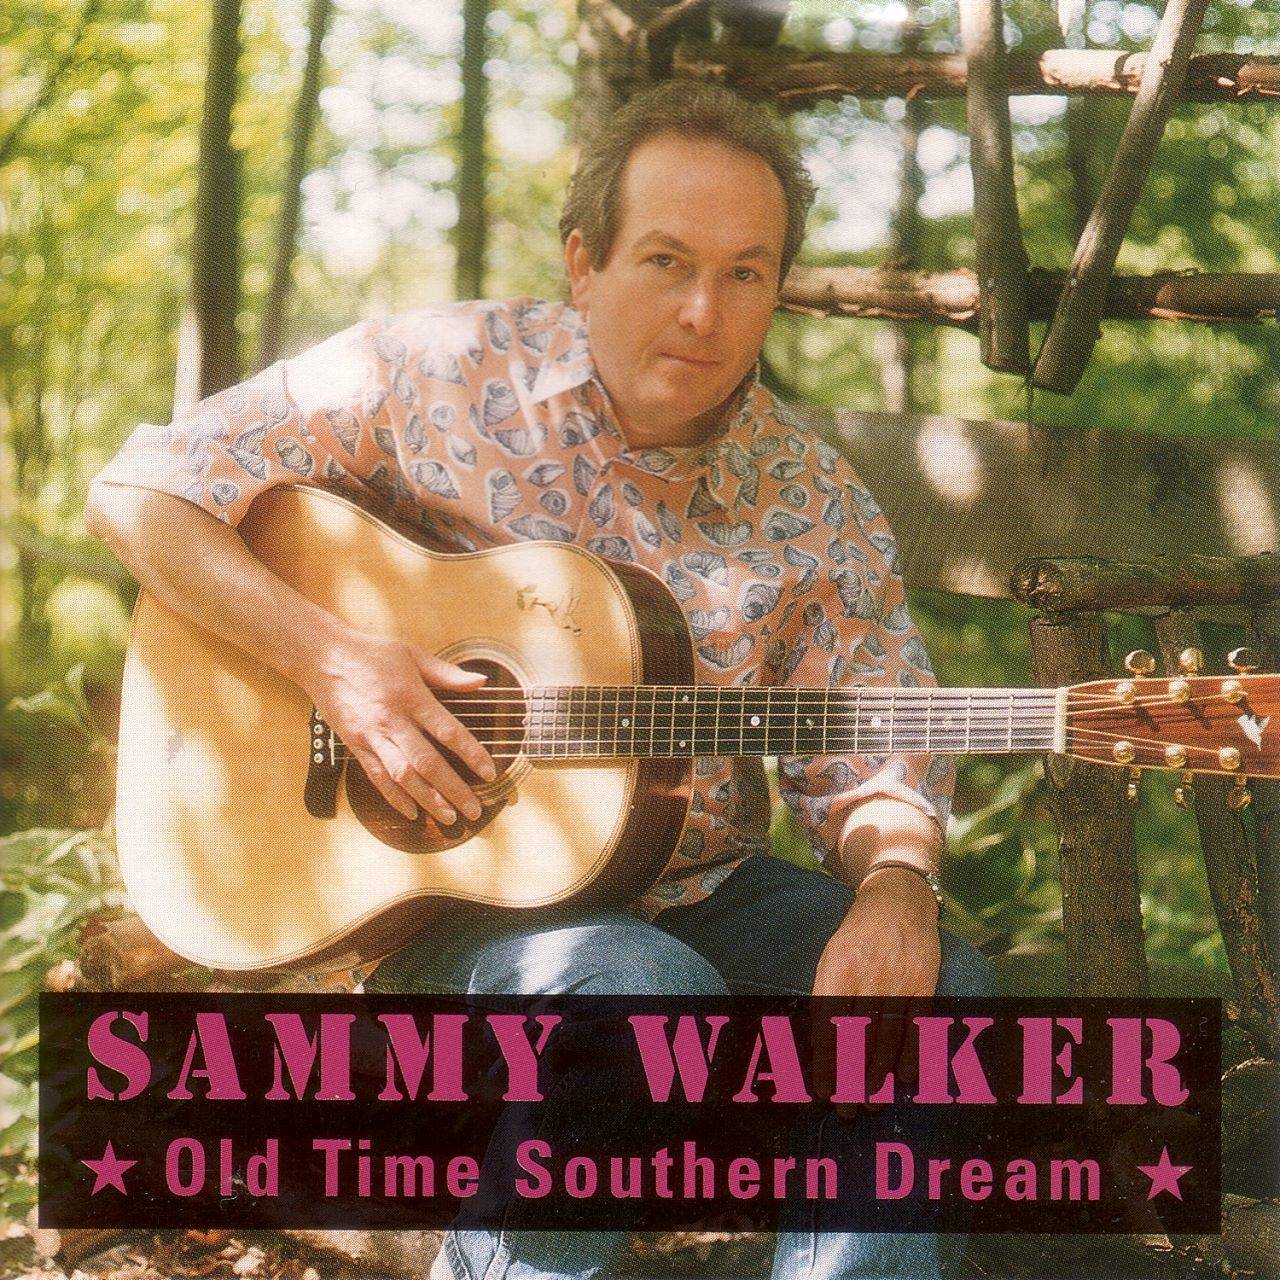 Sammy Walker - Old Time Southern Dream cover album